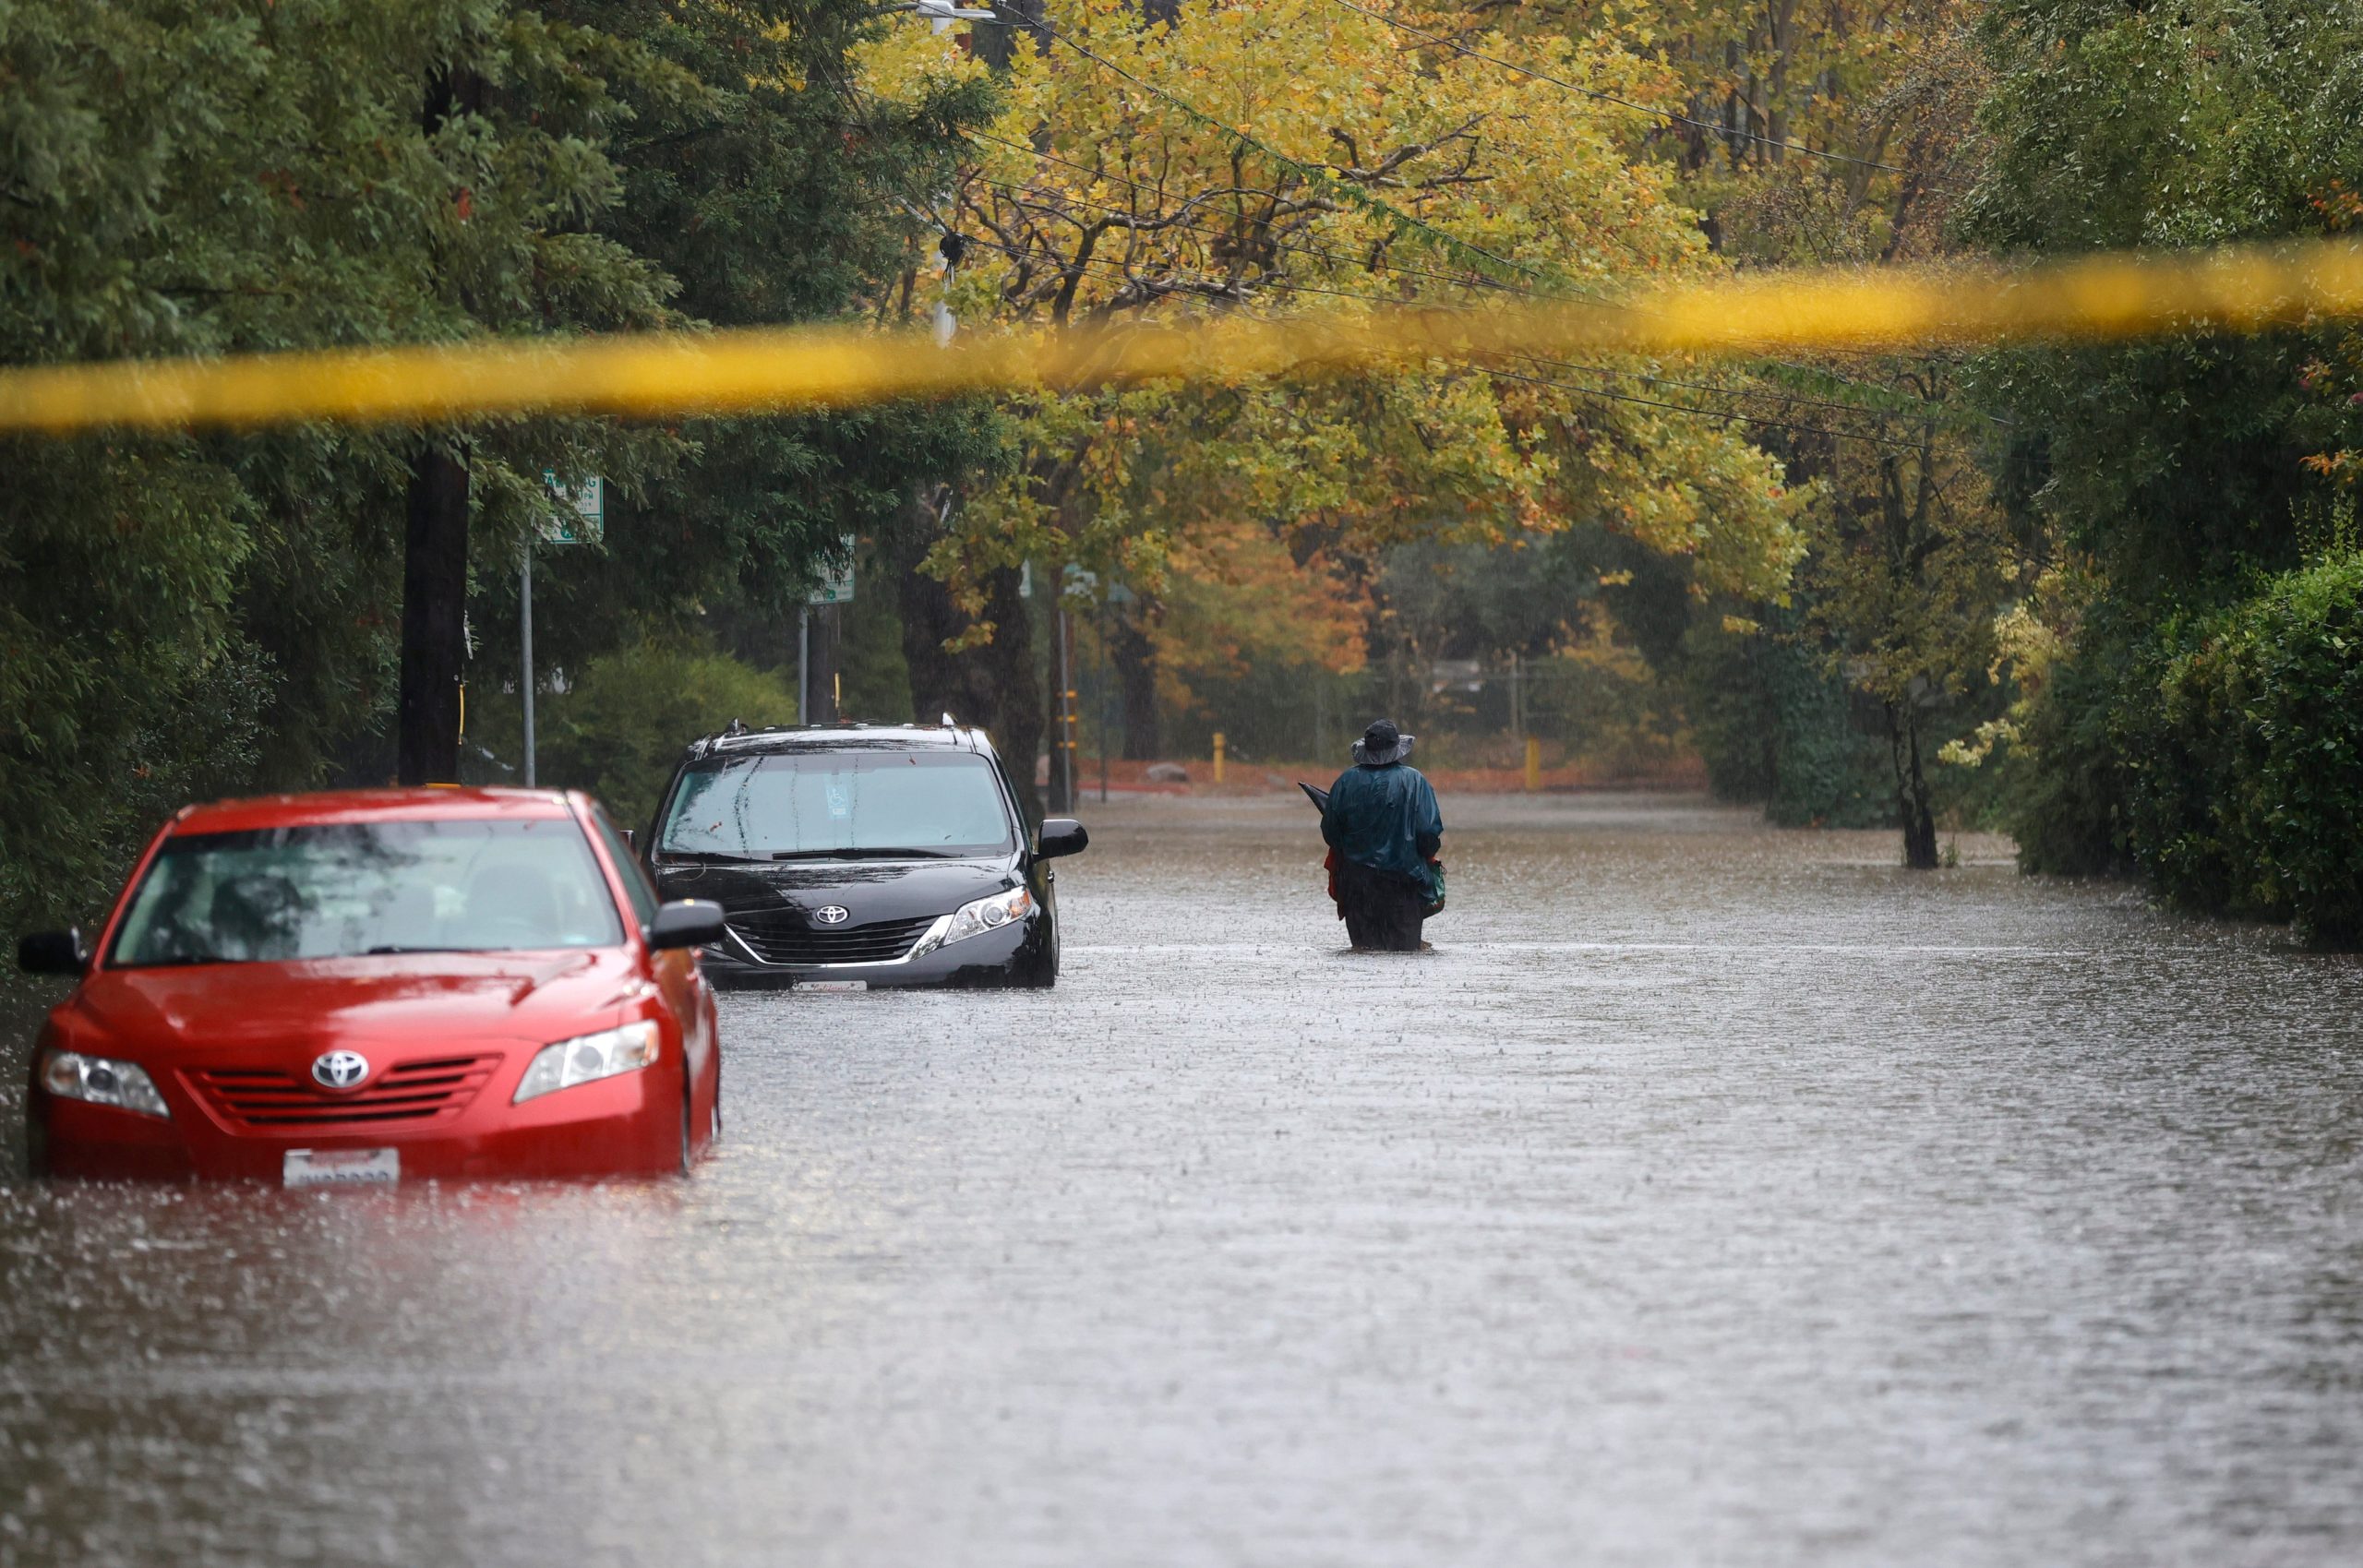 A pedestrian walks on a flooded street on October 24, 2021 in Kentfield, California. (Photo: Justin Sullivan, Getty Images)